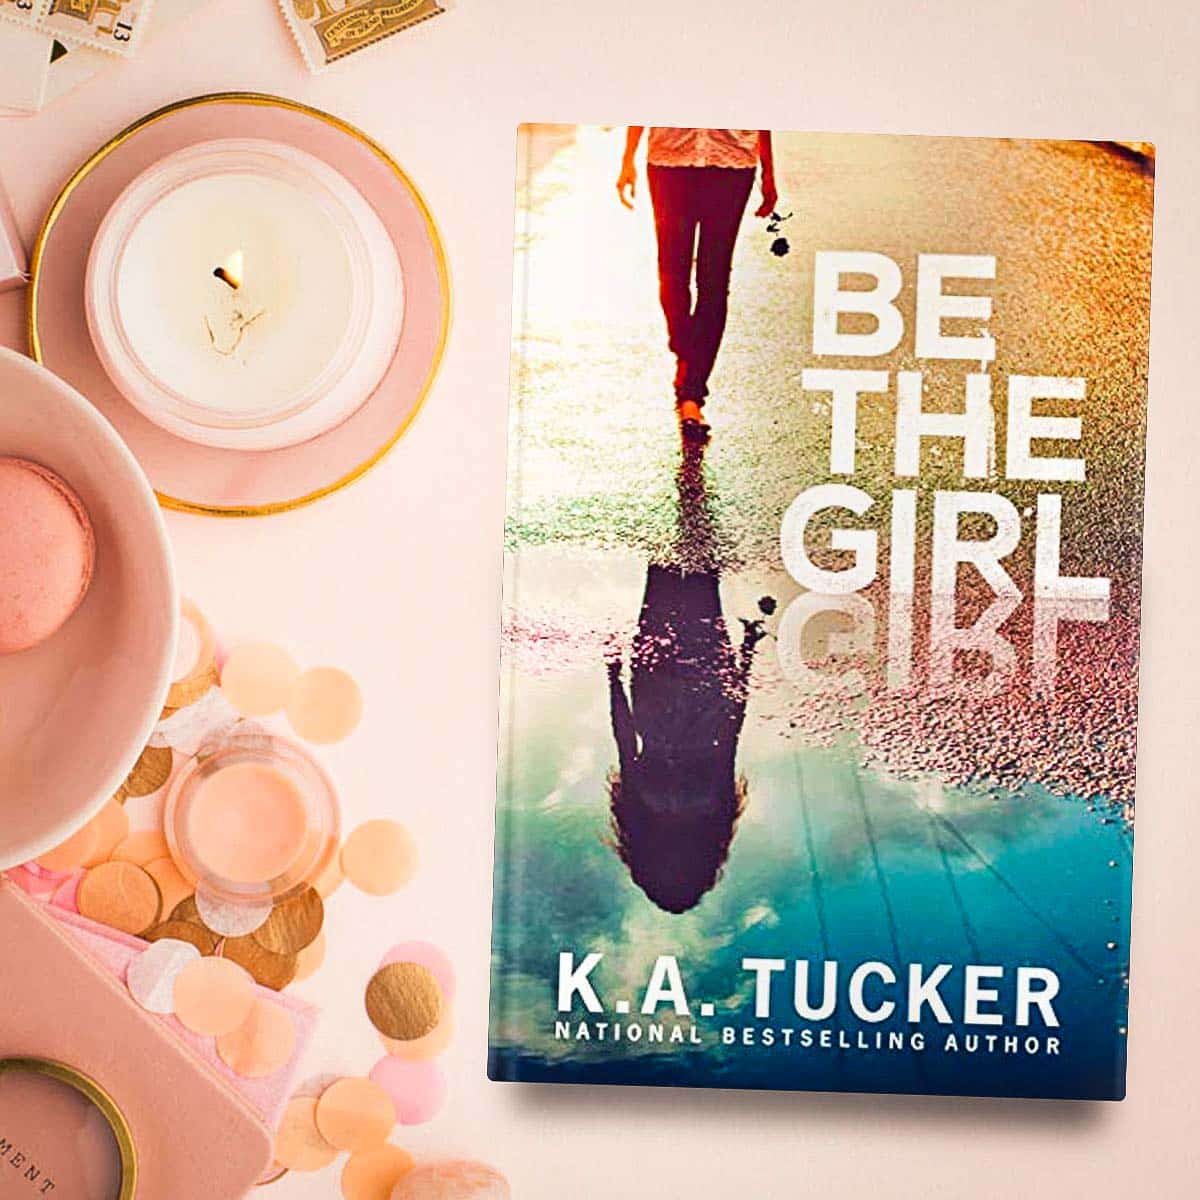 Be the Girl by K.A. Tucker is a poignant and timely young adult romance navigating the dangers of bullying in high school that I recommend for both adults and teens.